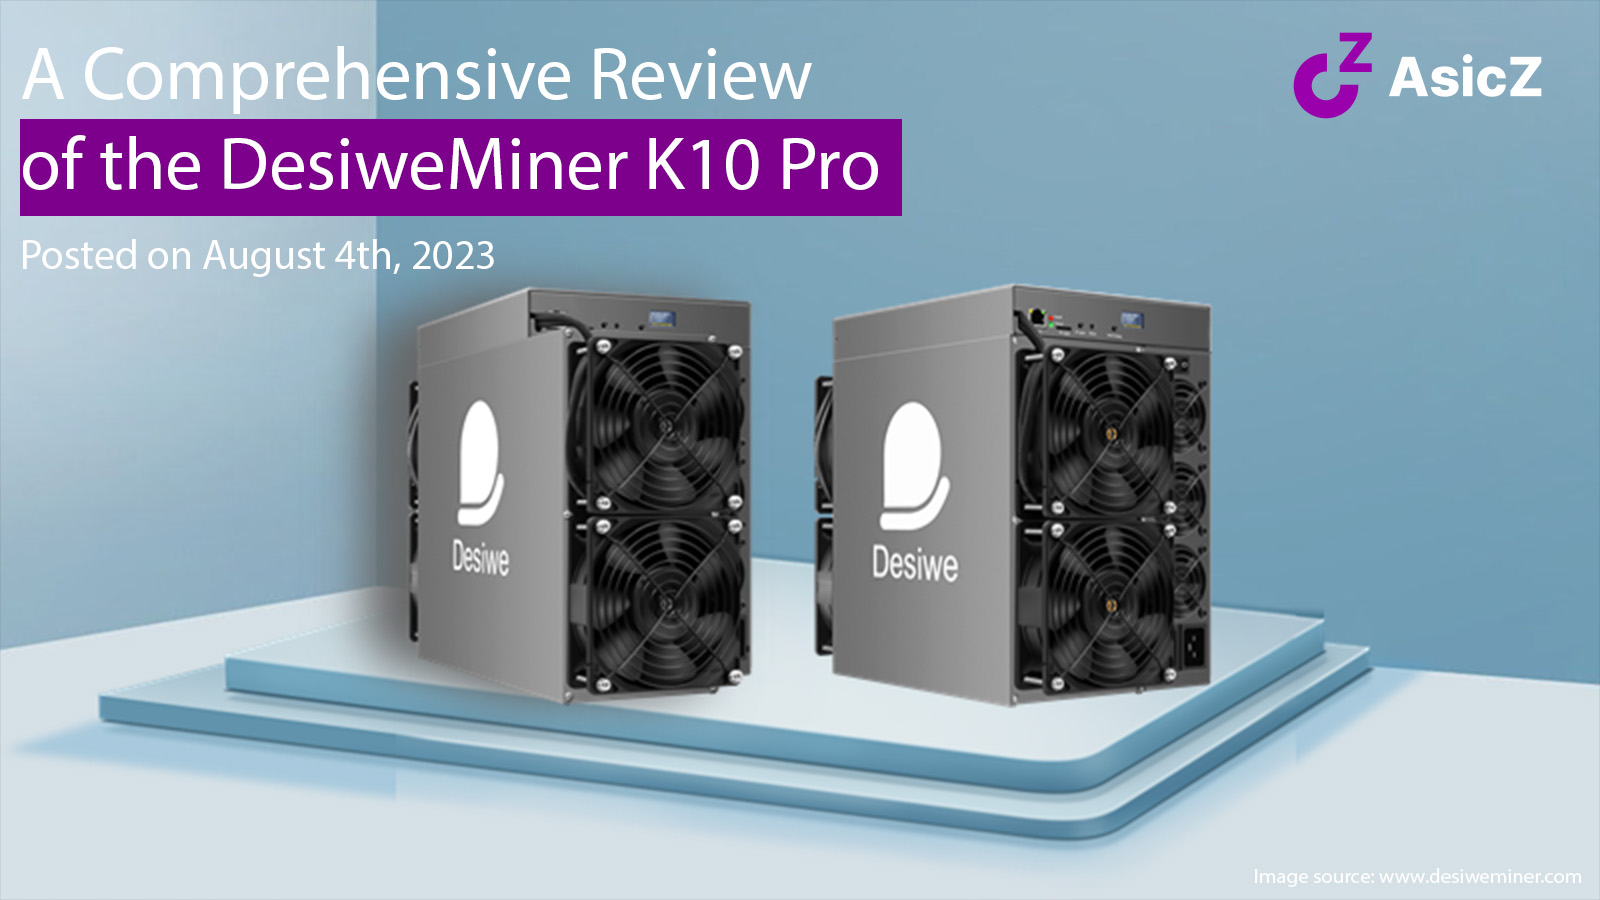 Future Friday: A Comprehensive Review of the DesiweMiner K10 Pro